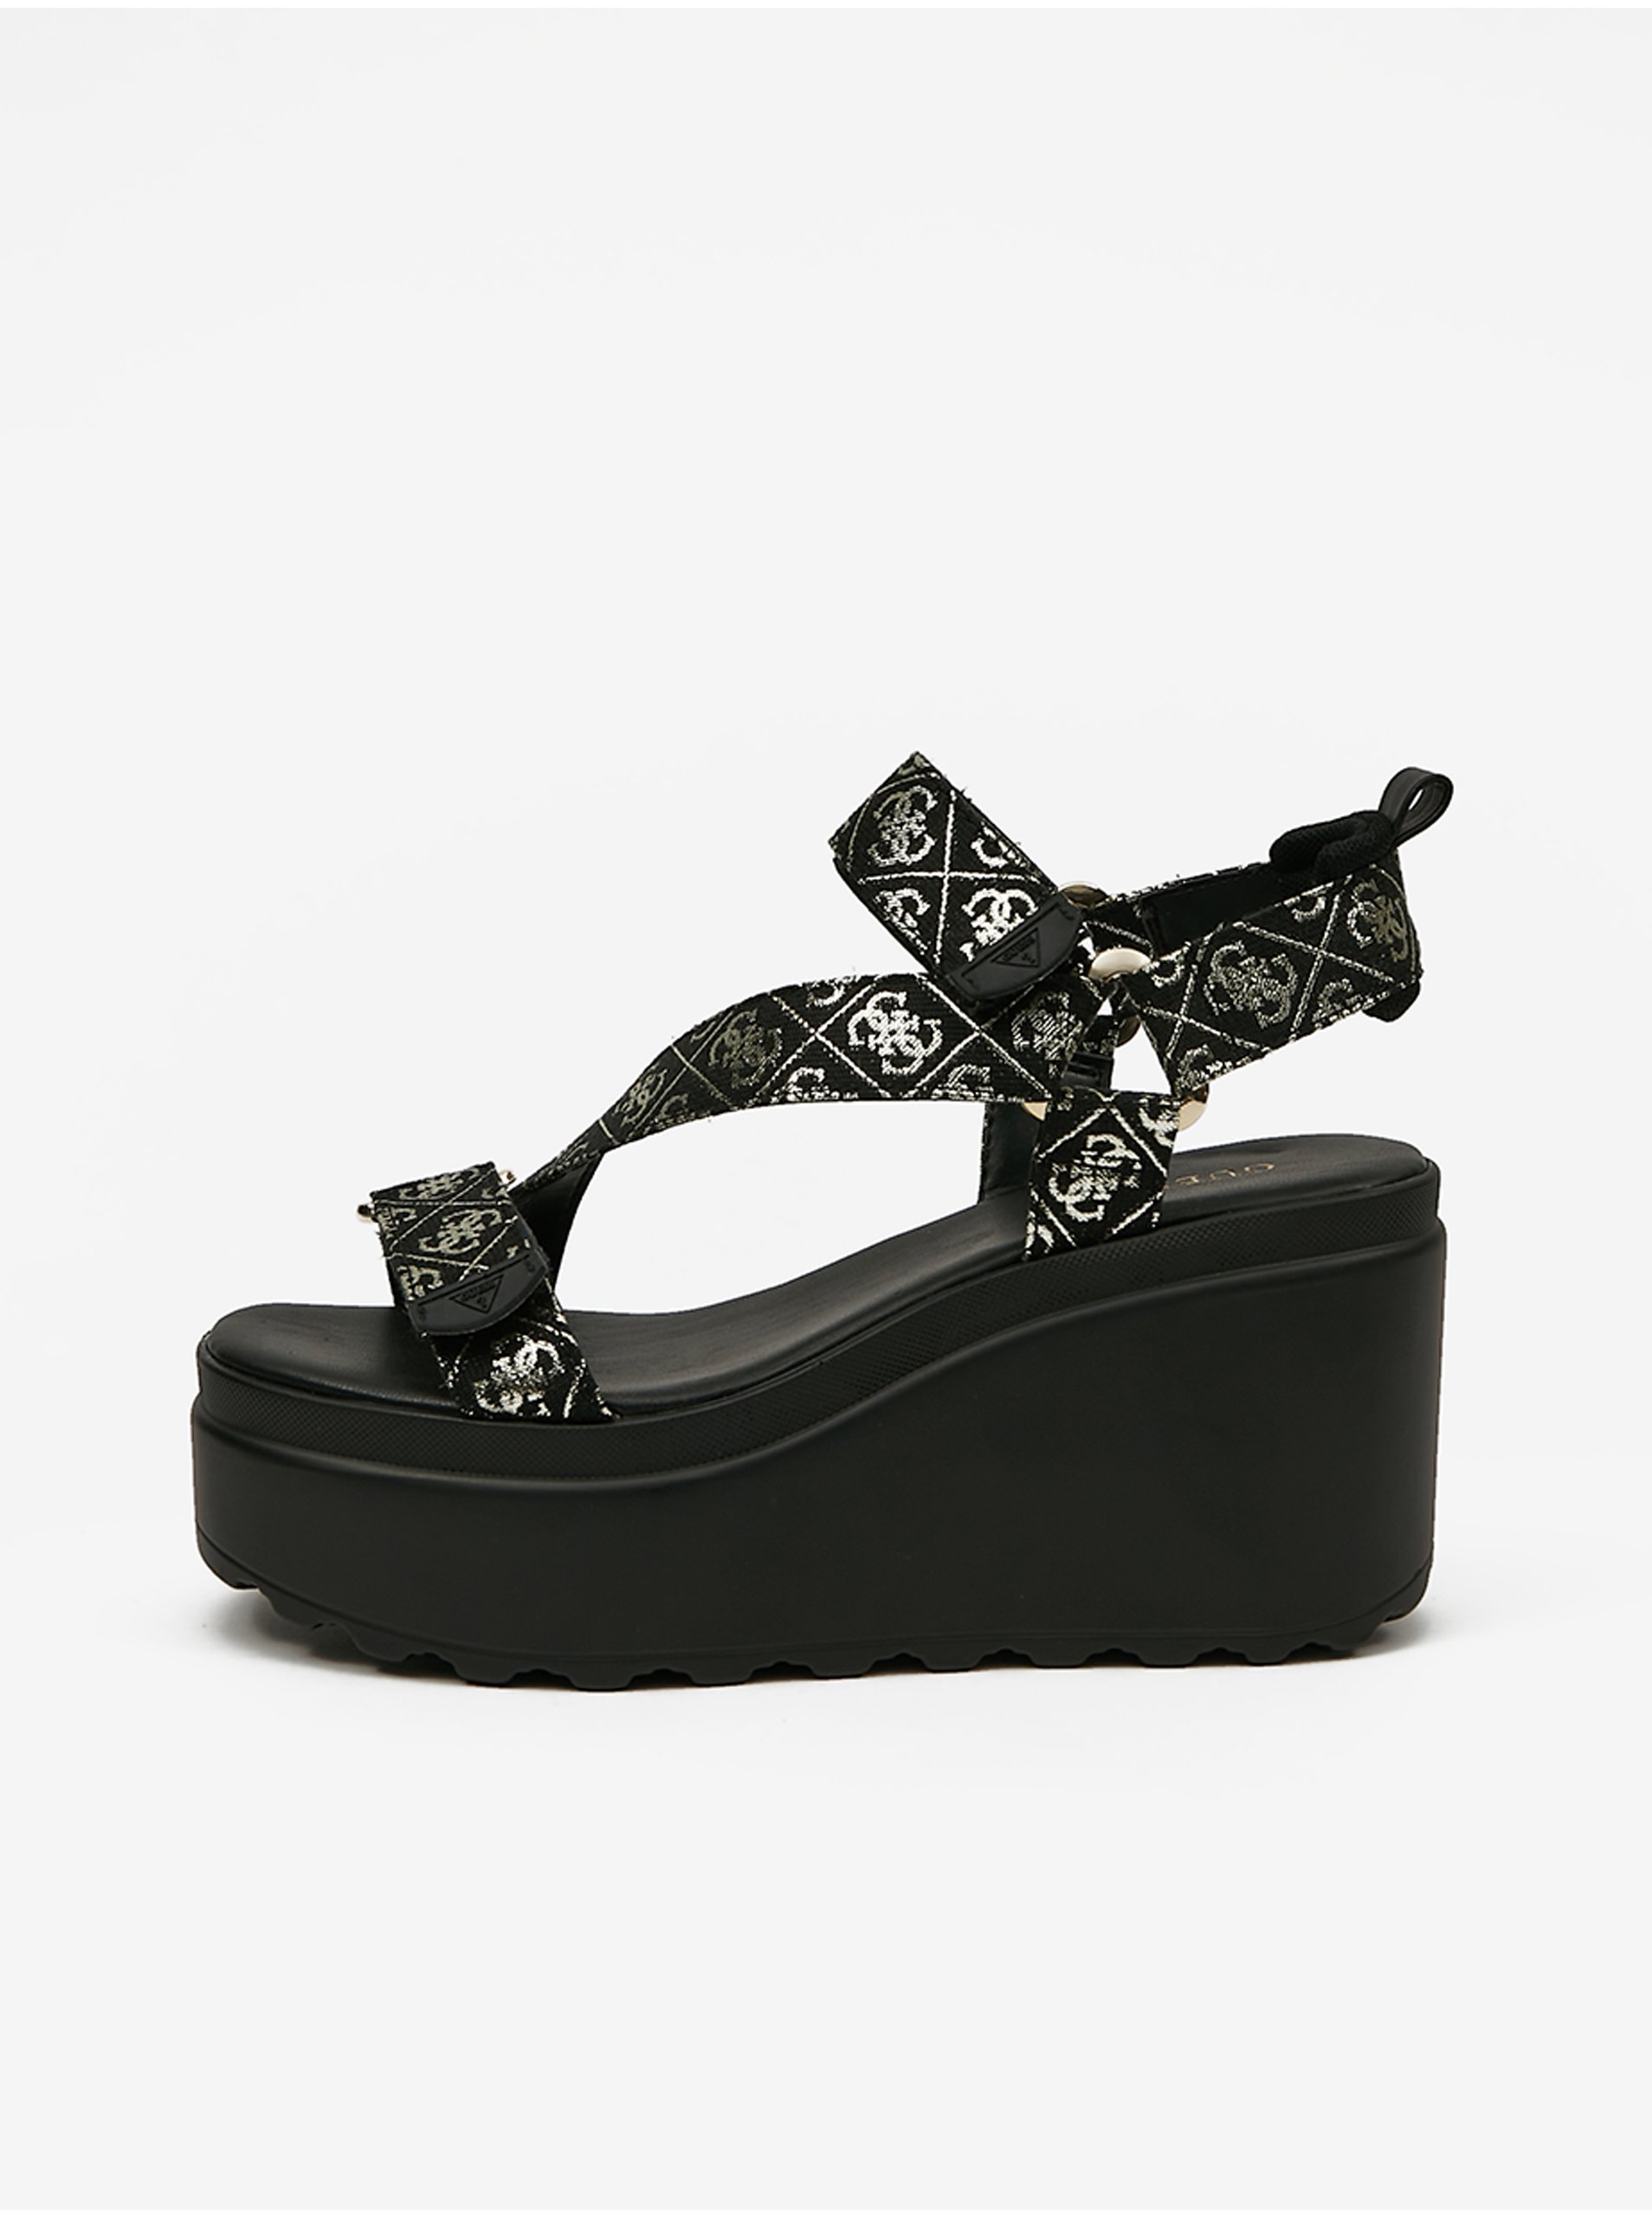 Black Women's Patterned Wedge Sandals Guess Ocilia - Women